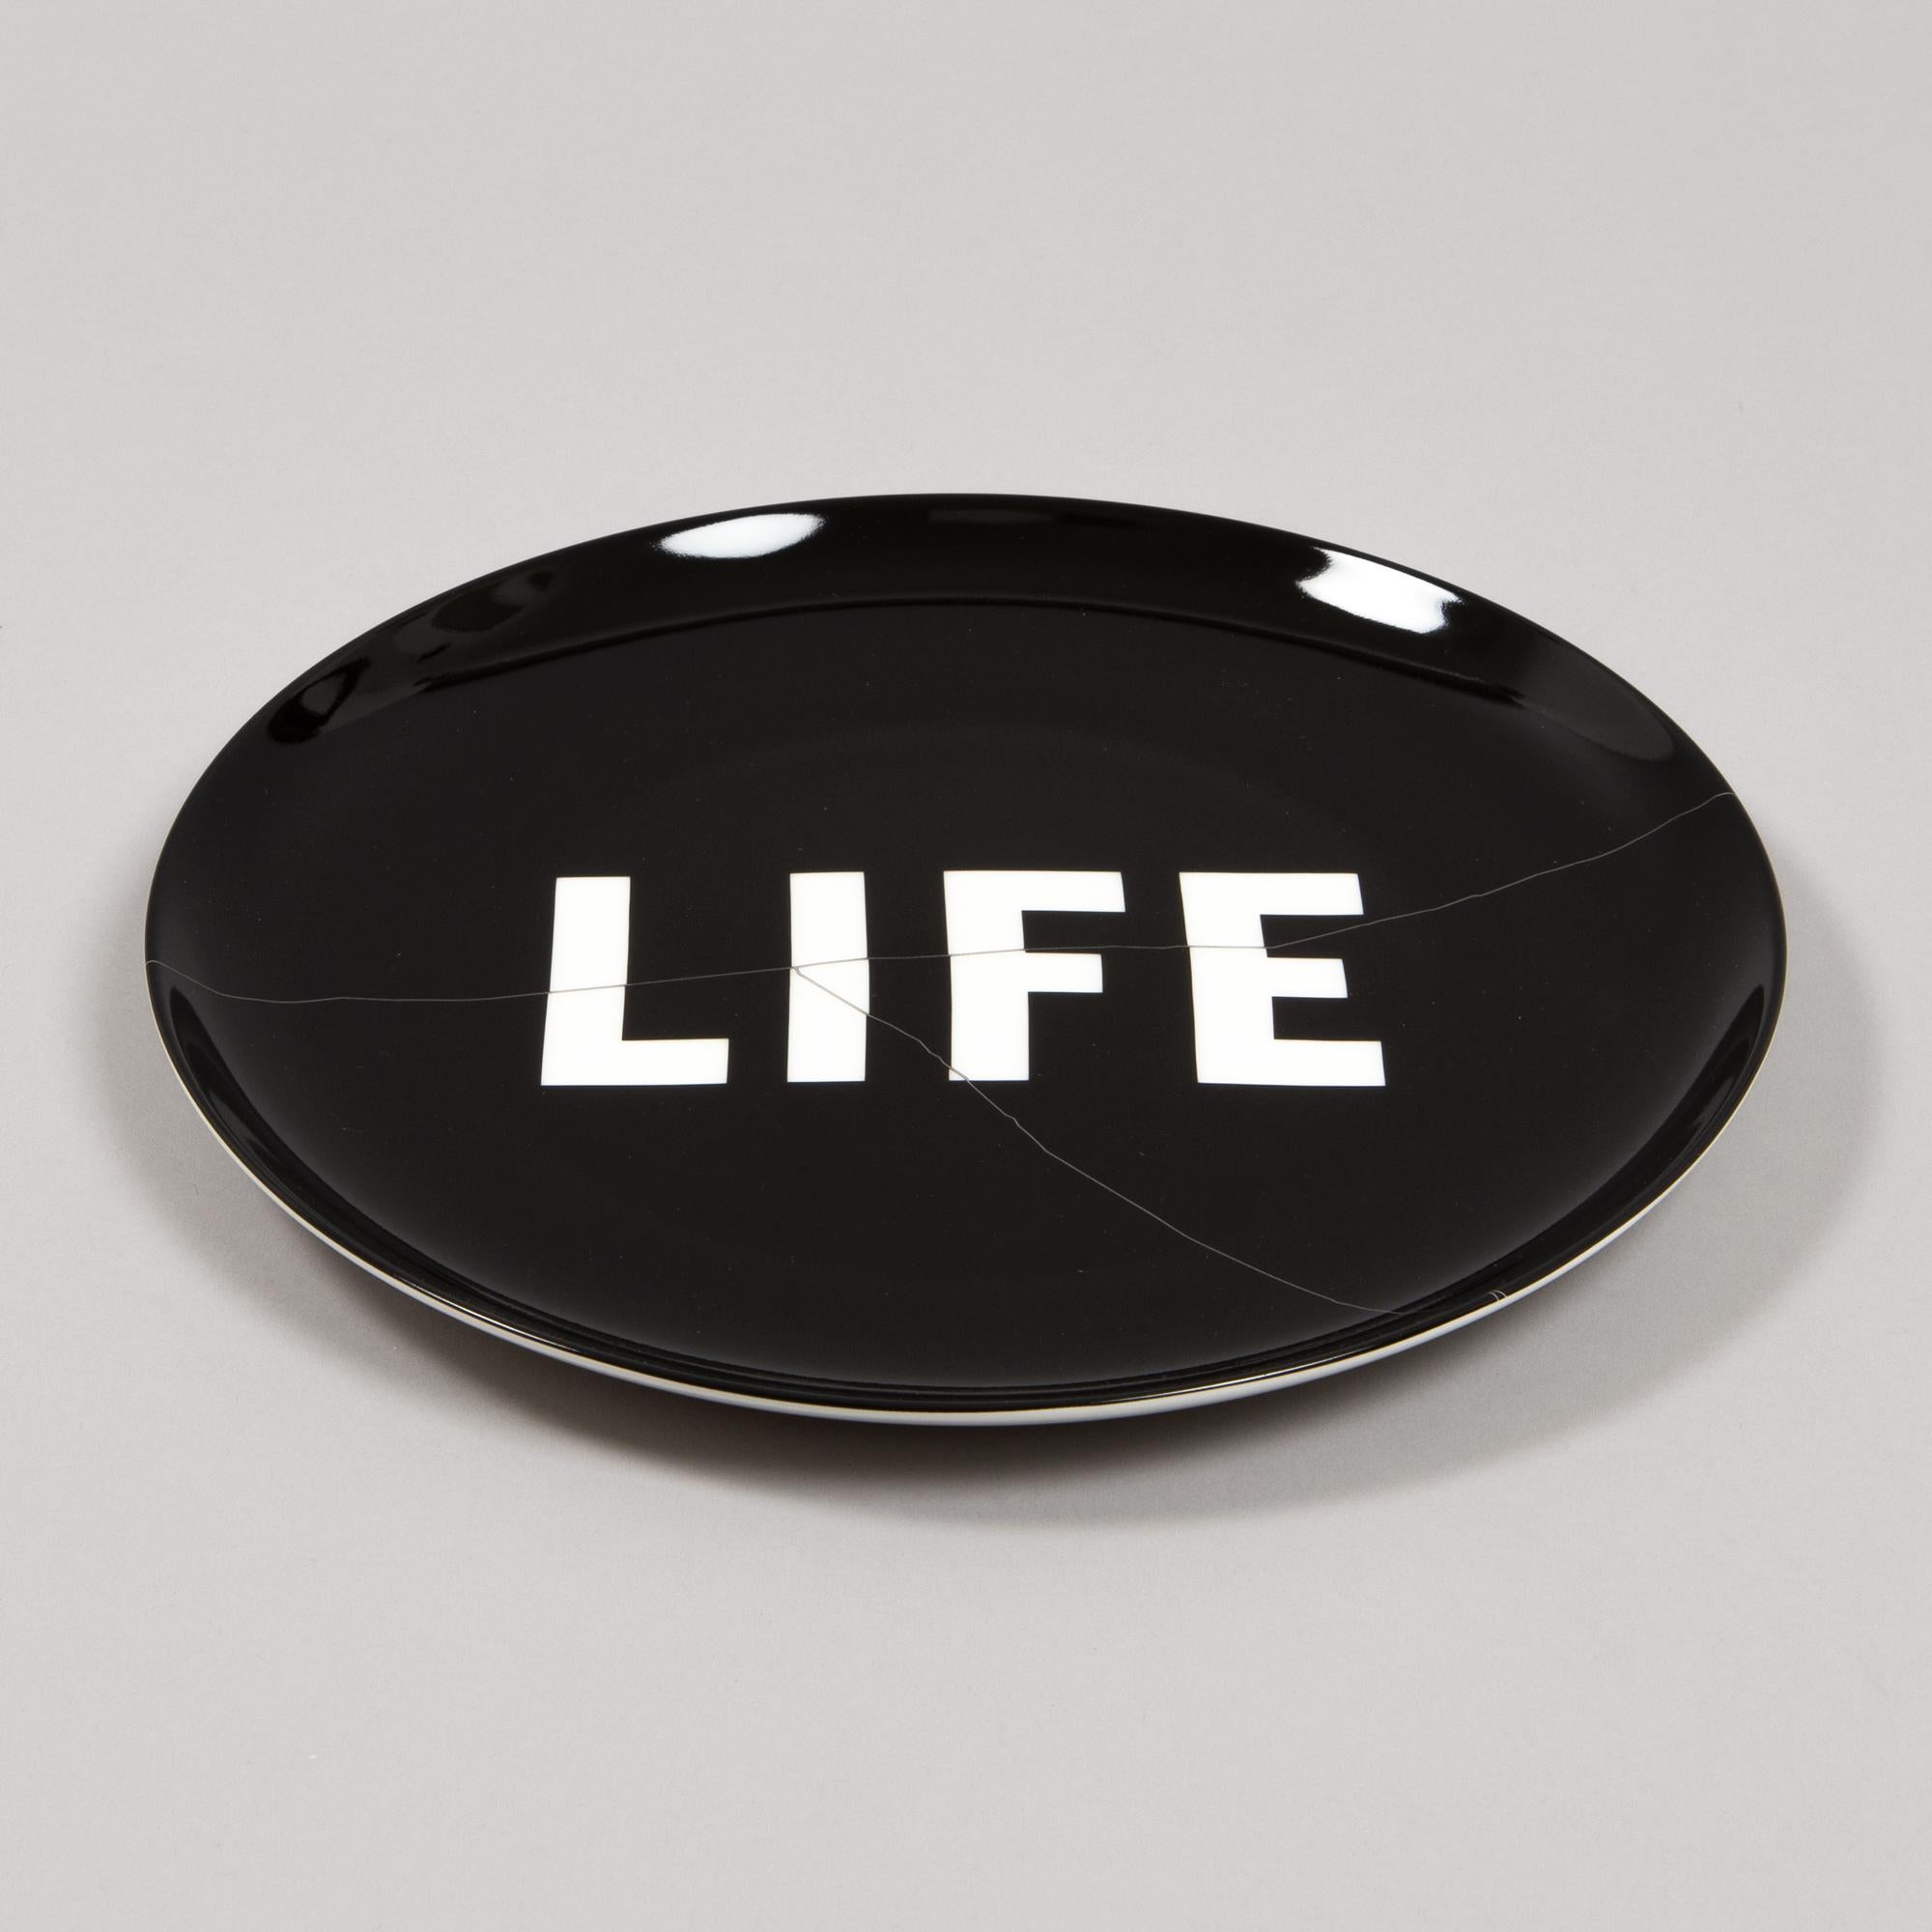 Virgil Abloh (American, 1980-2021)
Life Itself, 2022
Medium: Porcelain plate (fine bone china)
Dimensions: 10 1/2 in diameter | 26.7 cm diameter
Edition of 250: Printed signature and edition details on verso
Condition: Mint (in original presentation